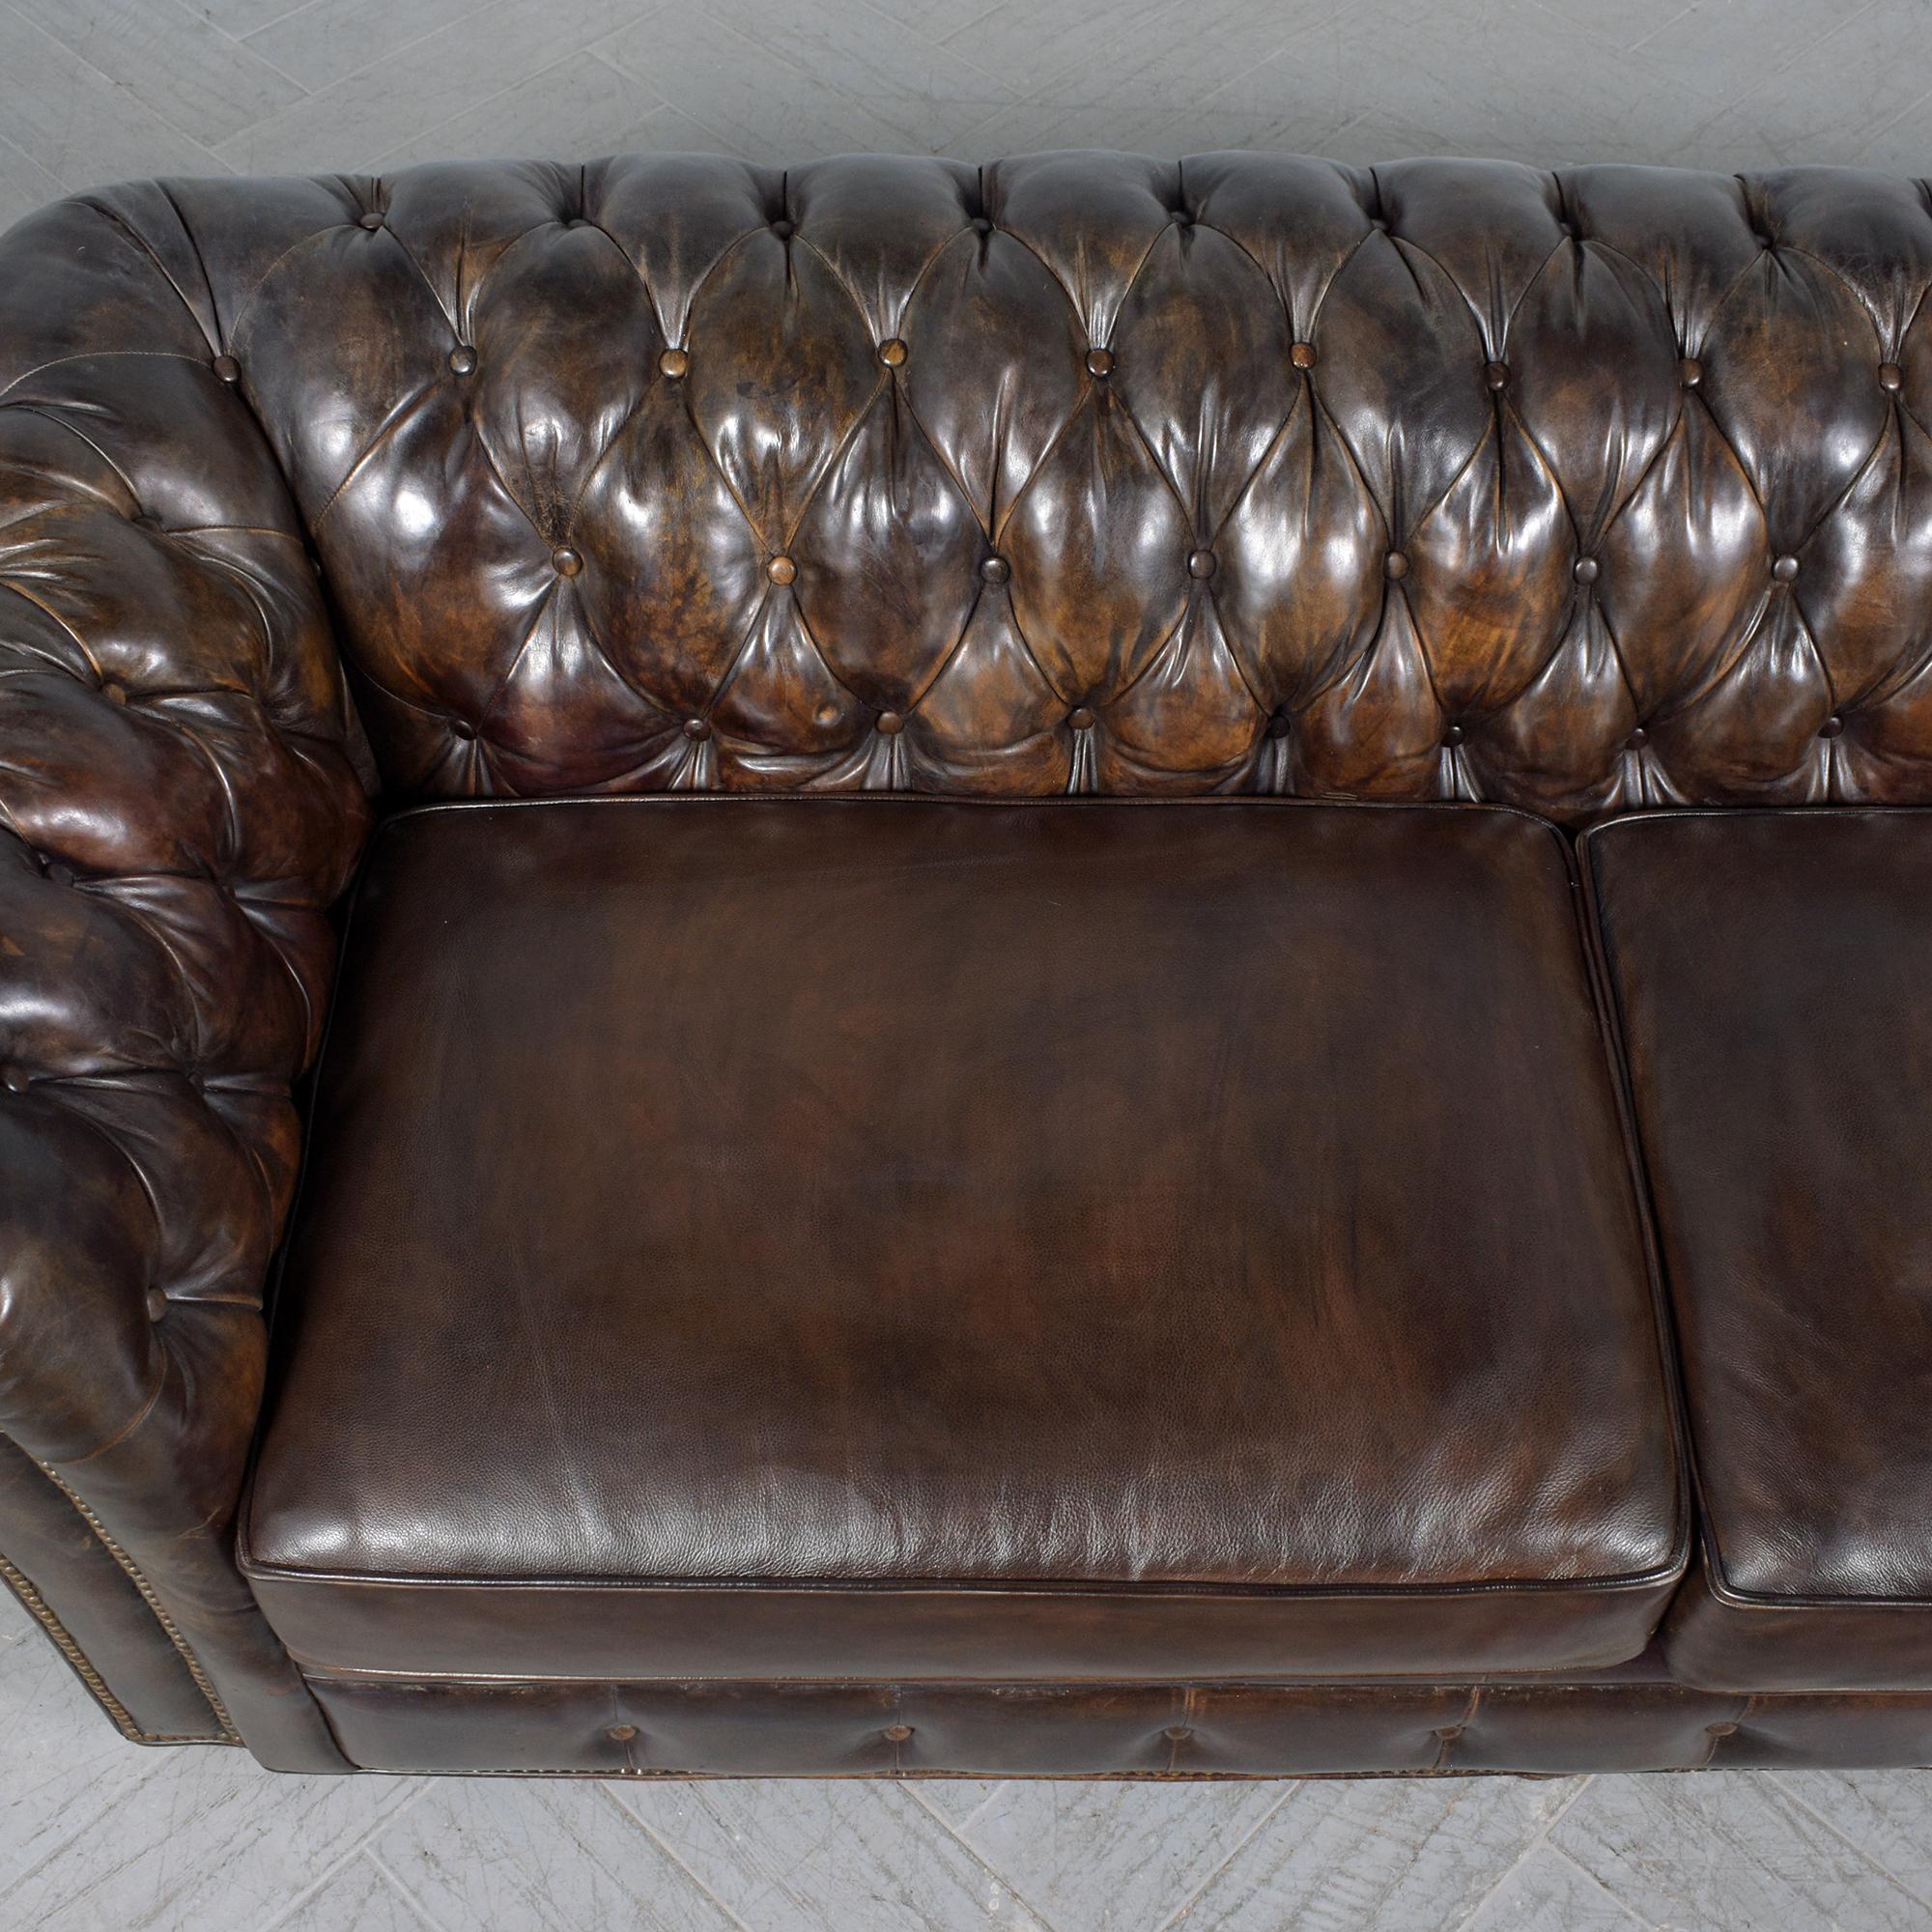 Polished 1970s Vintage Chesterfield Sofa: Brown Leather Elegance